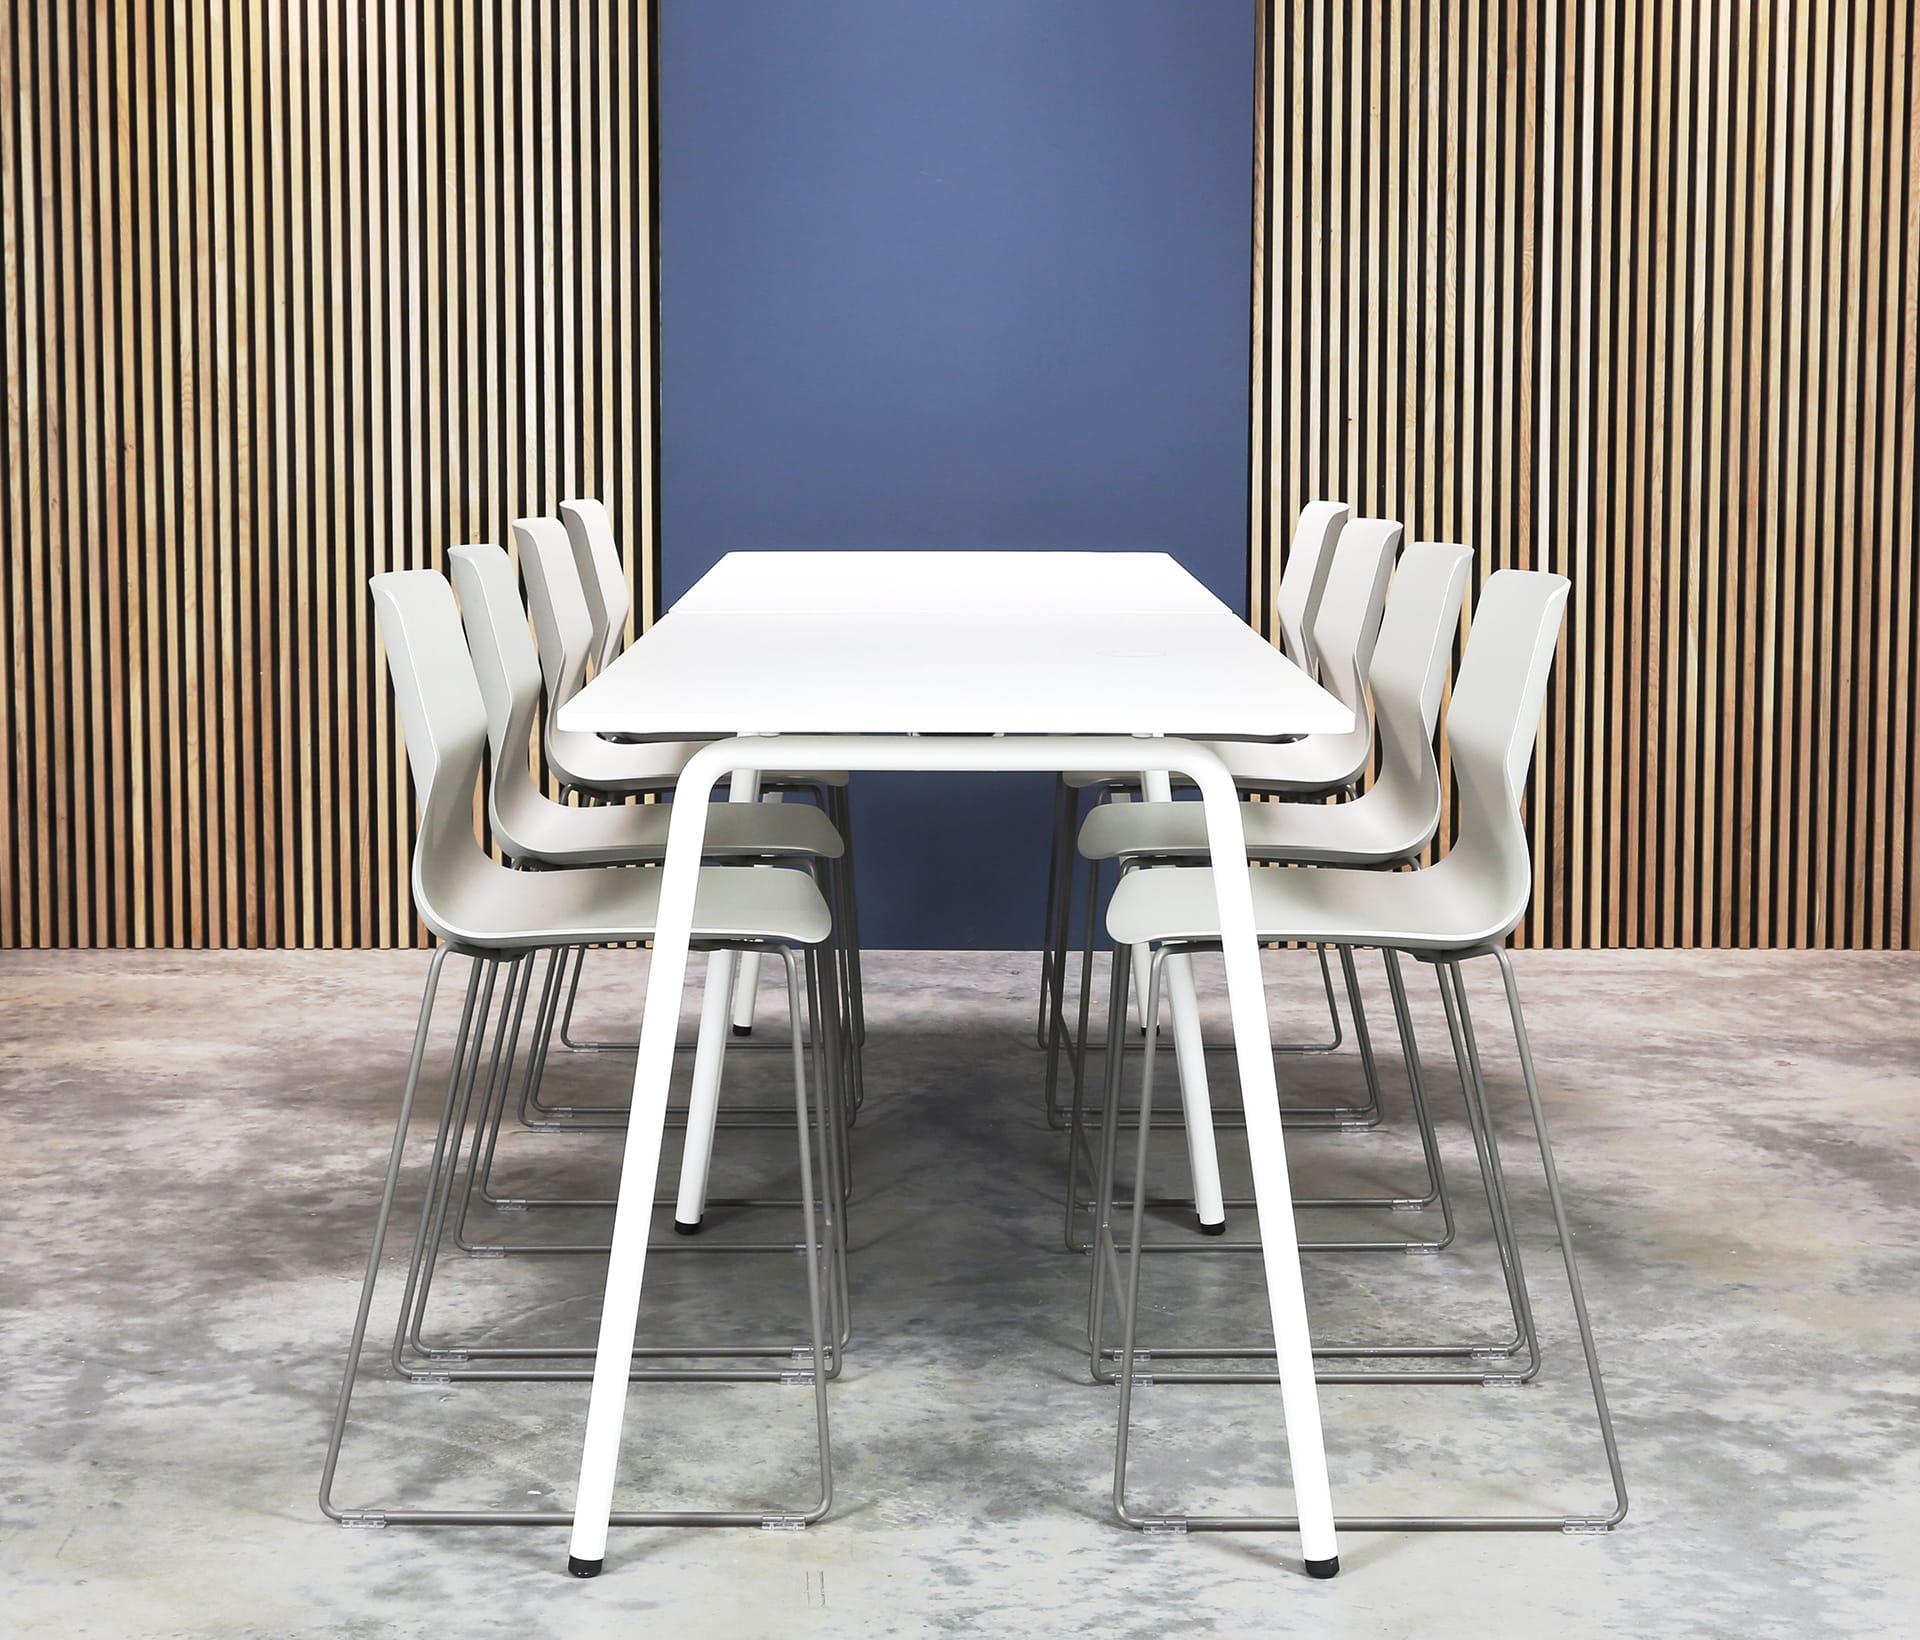 A white table and counter chairs in front of a wooden wall.